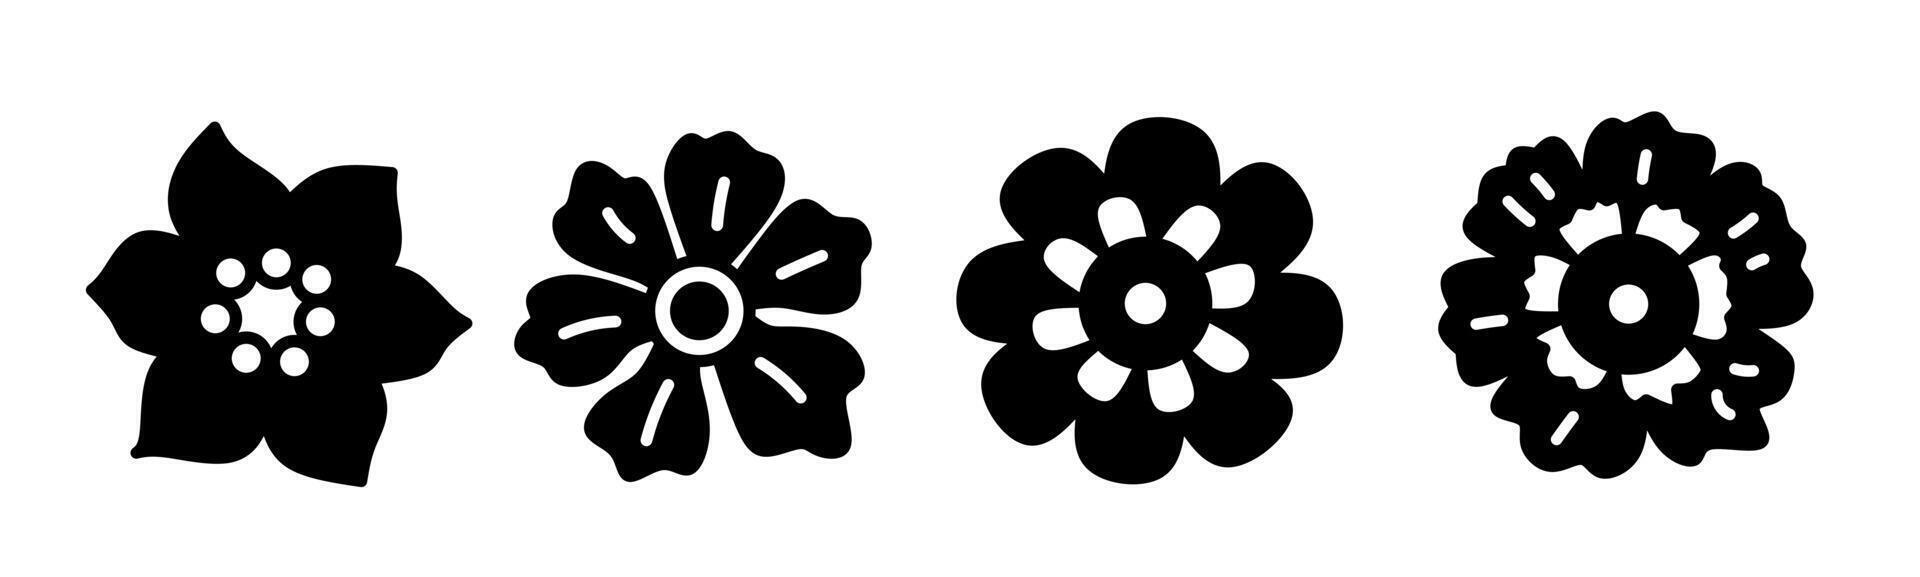 Flower icon collection. Stock vector illustration.